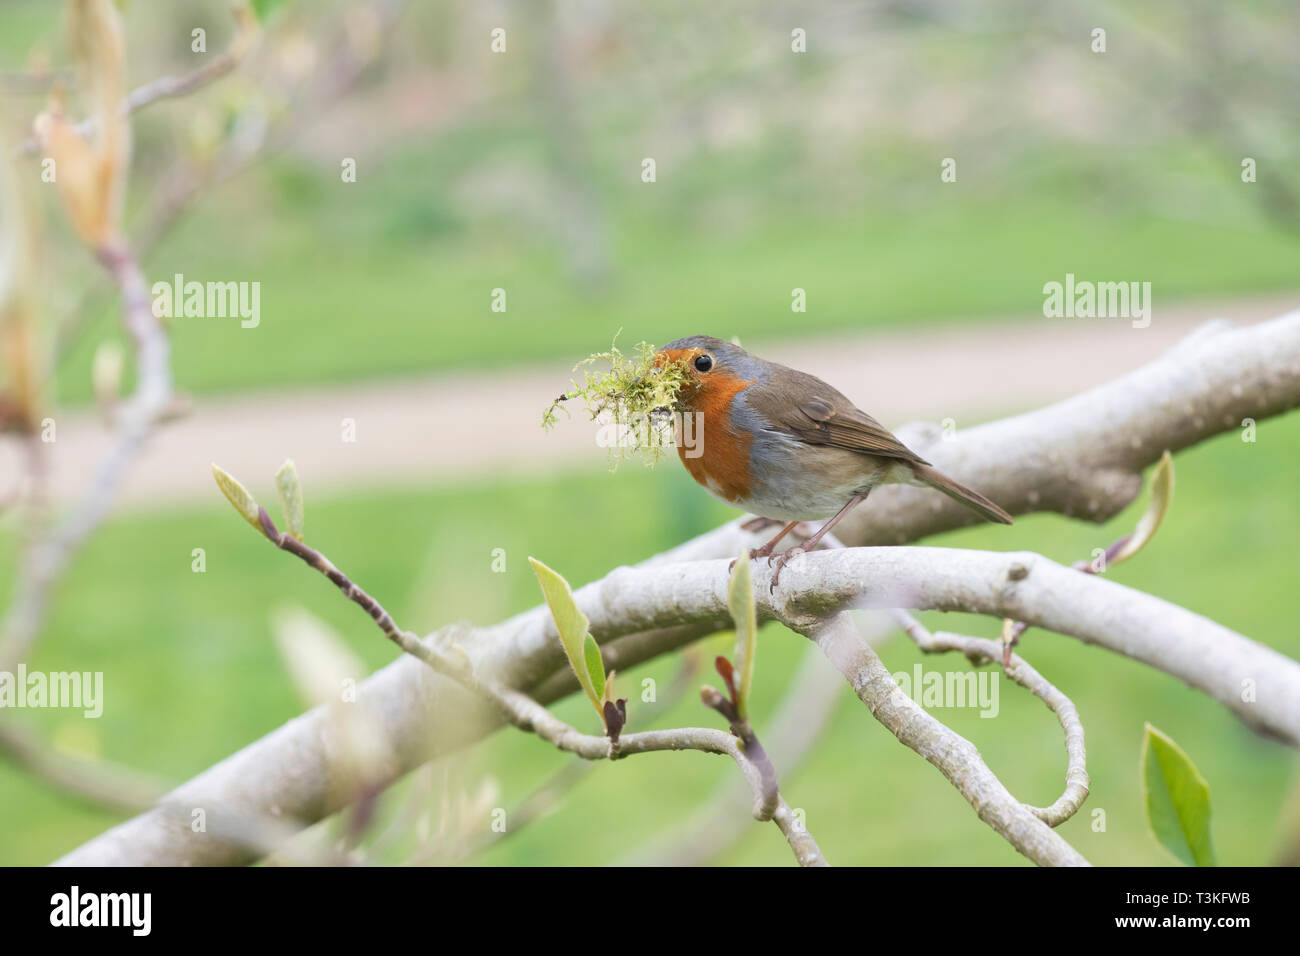 Erithacus Rubecula. Robin with nesting material in his beak in an English Garden Stock Photo